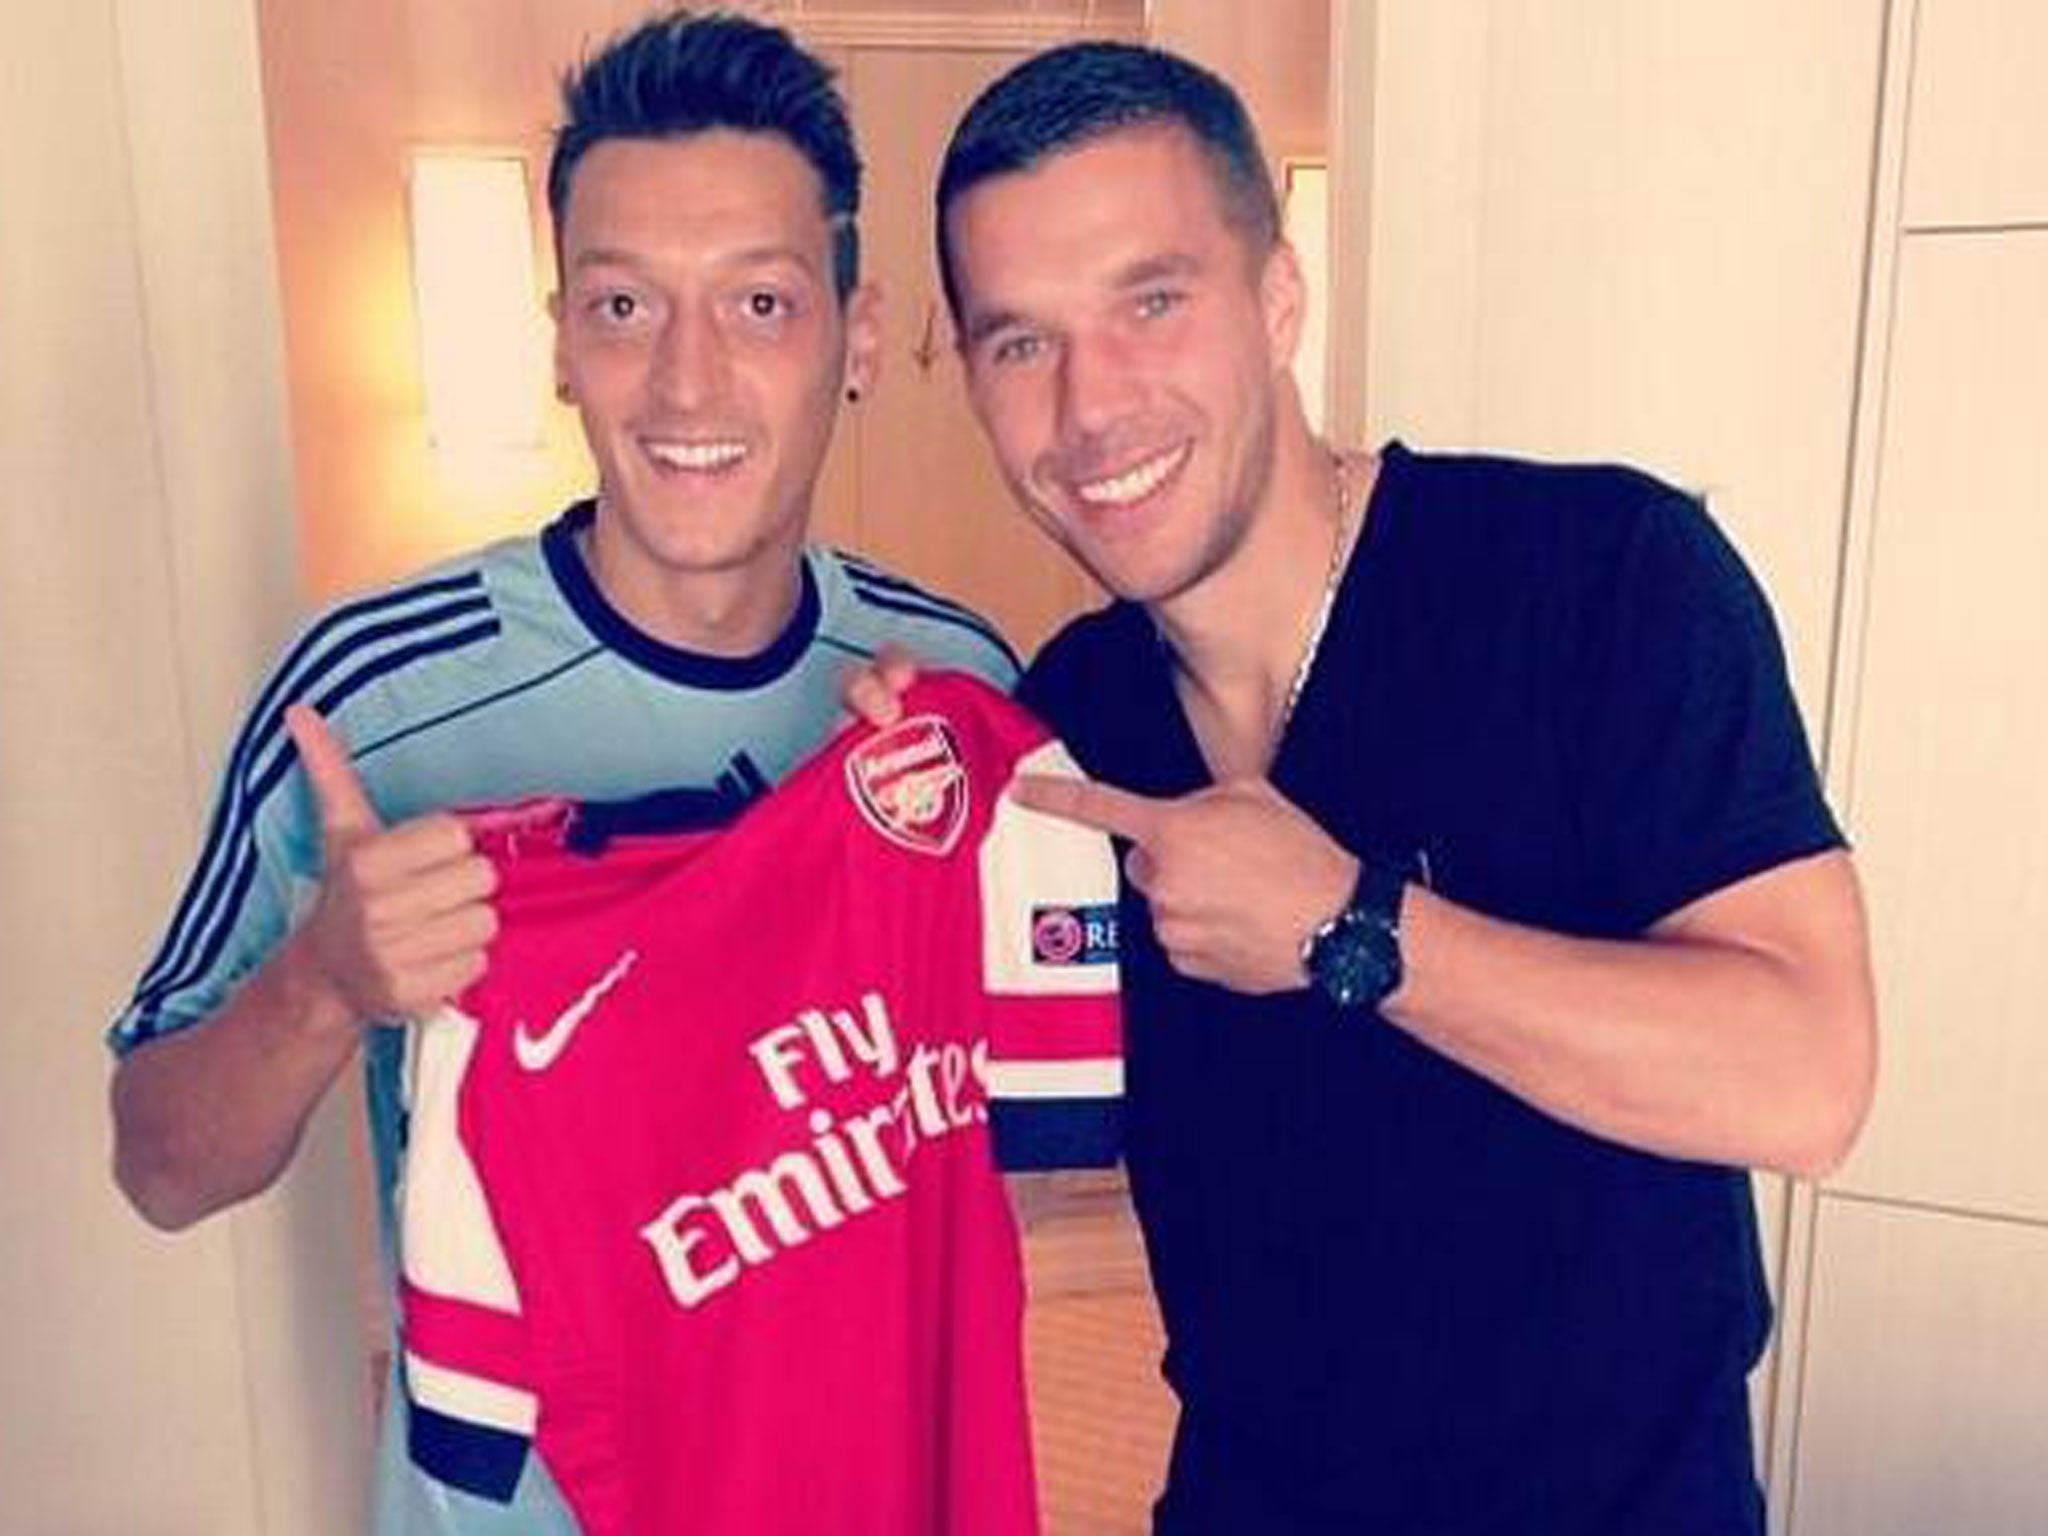 Mesut Ozil poses with new Arsenal team-mate Lukas Podolski while on duty with the Germany. Podolski, currently out with a hamstring injury, was being examined by the national team doctor